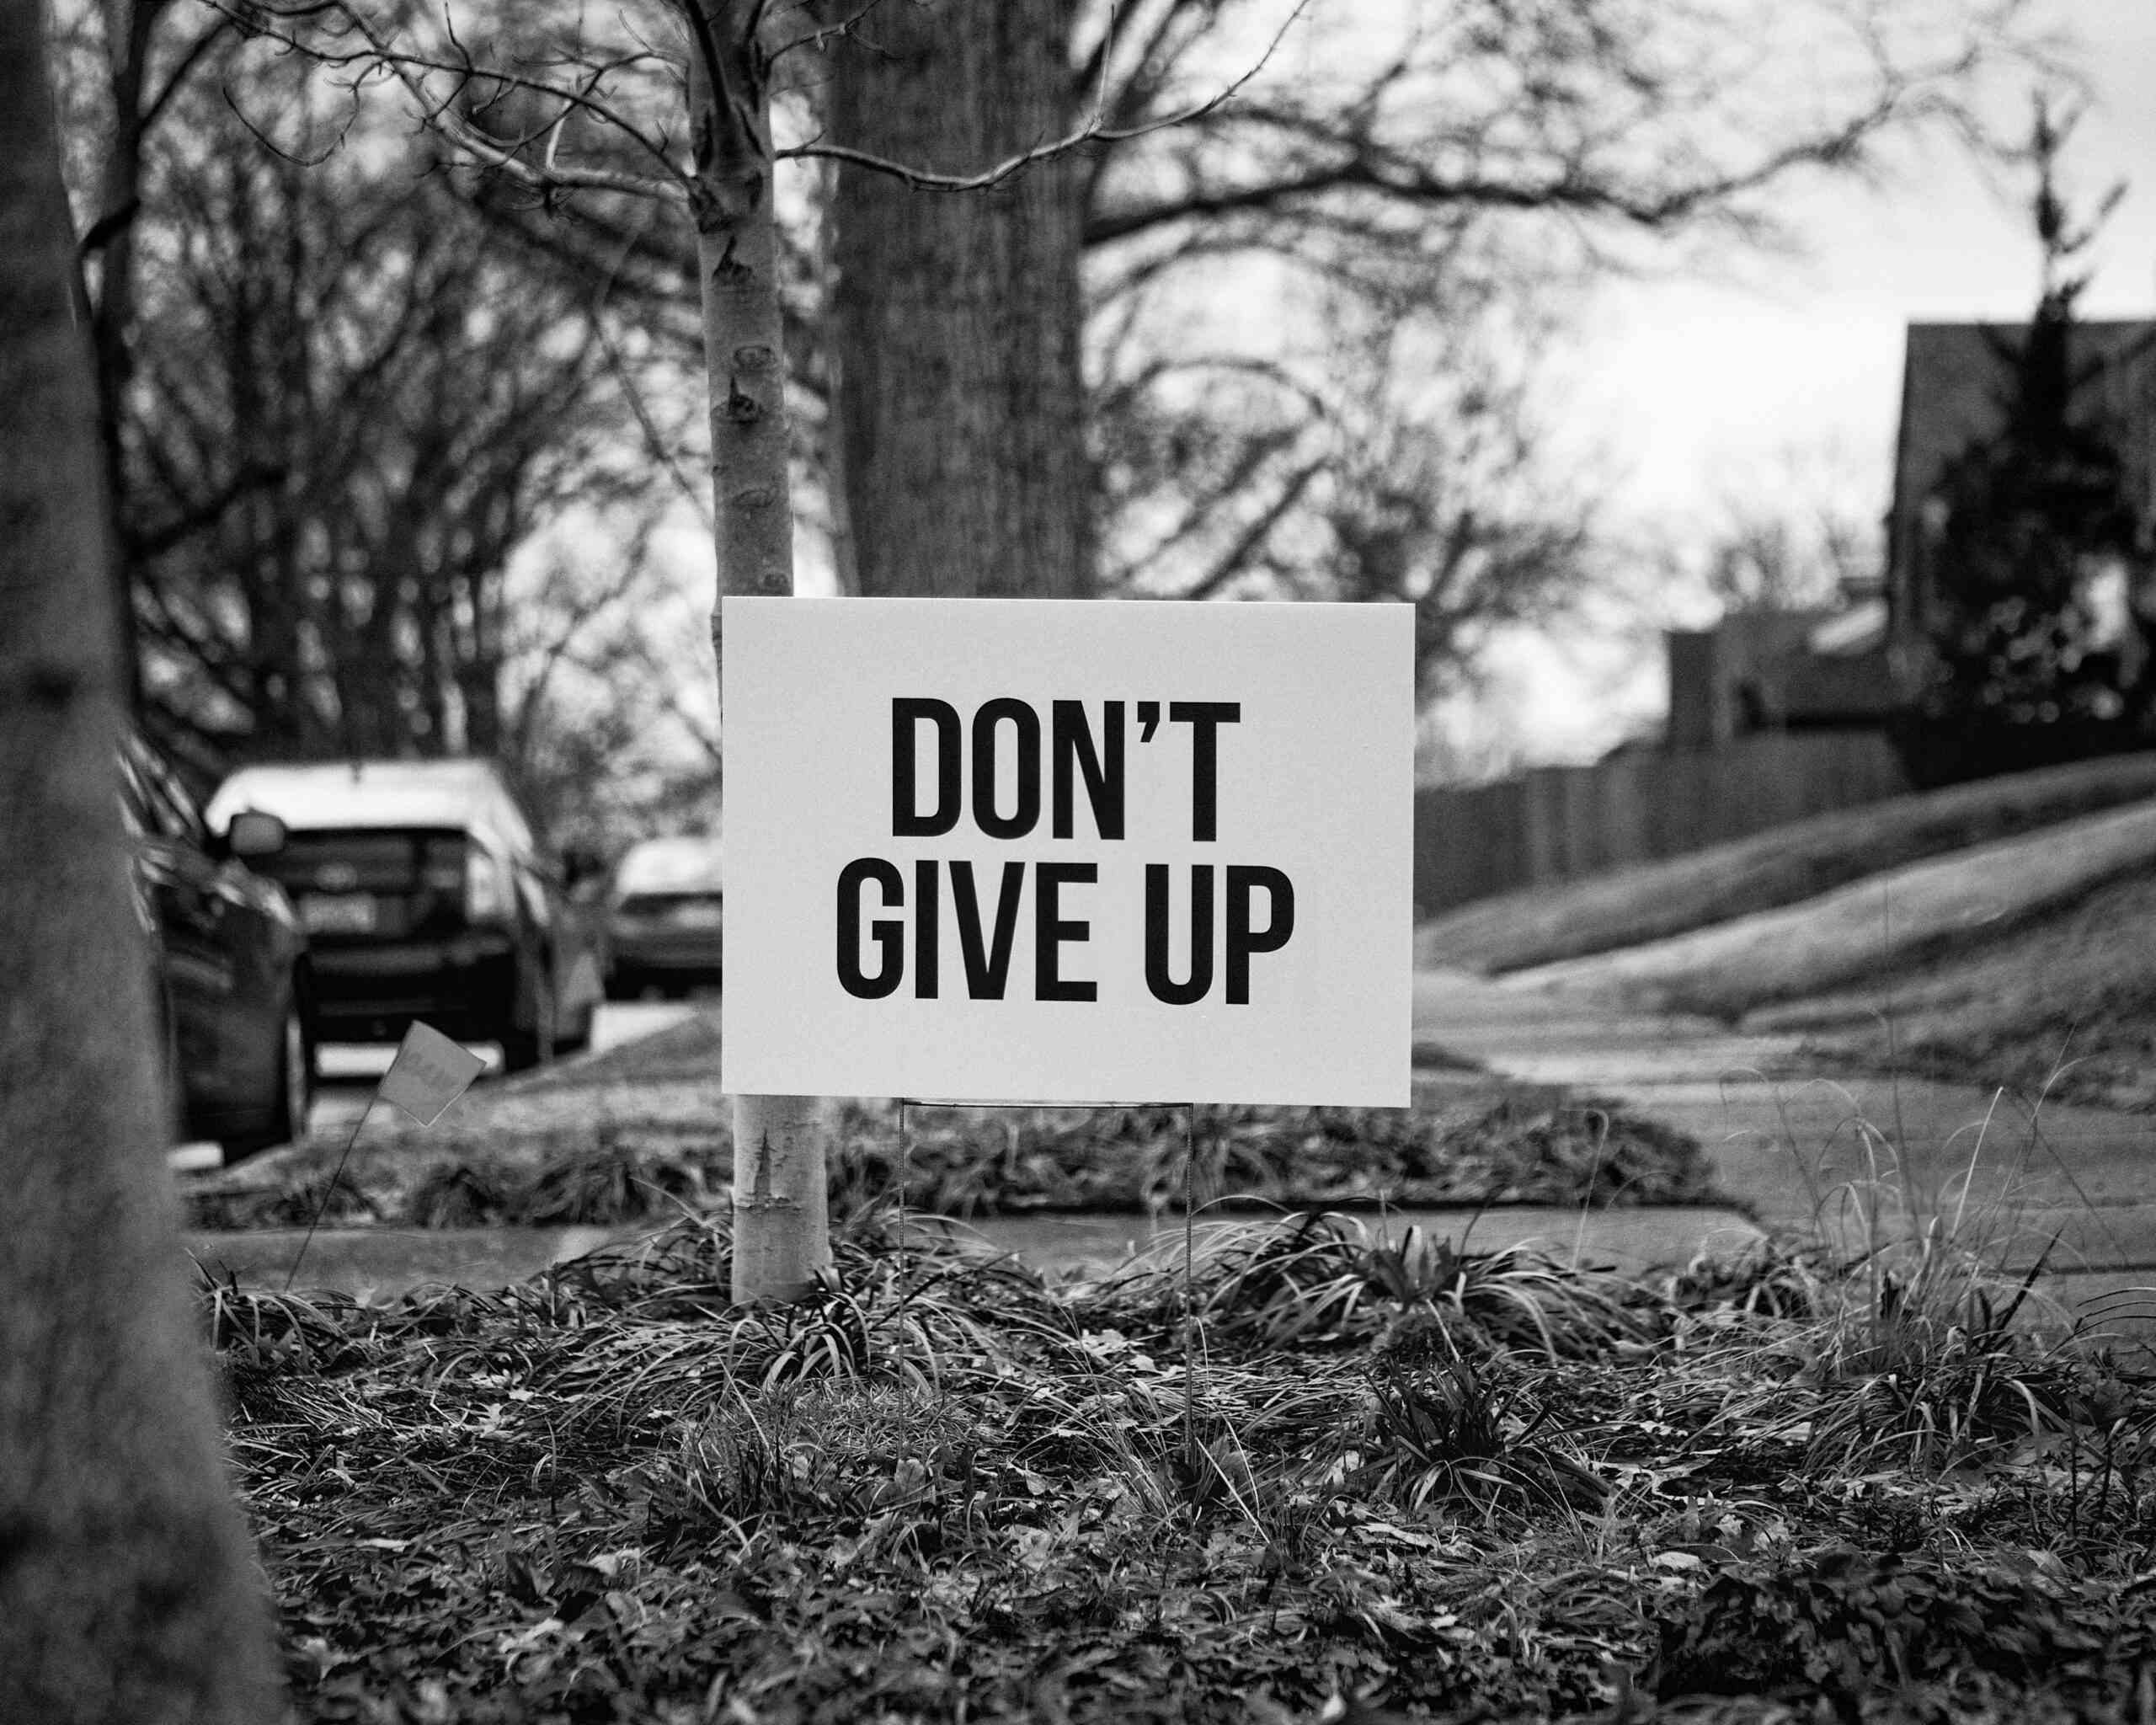 Do not give up written on a board